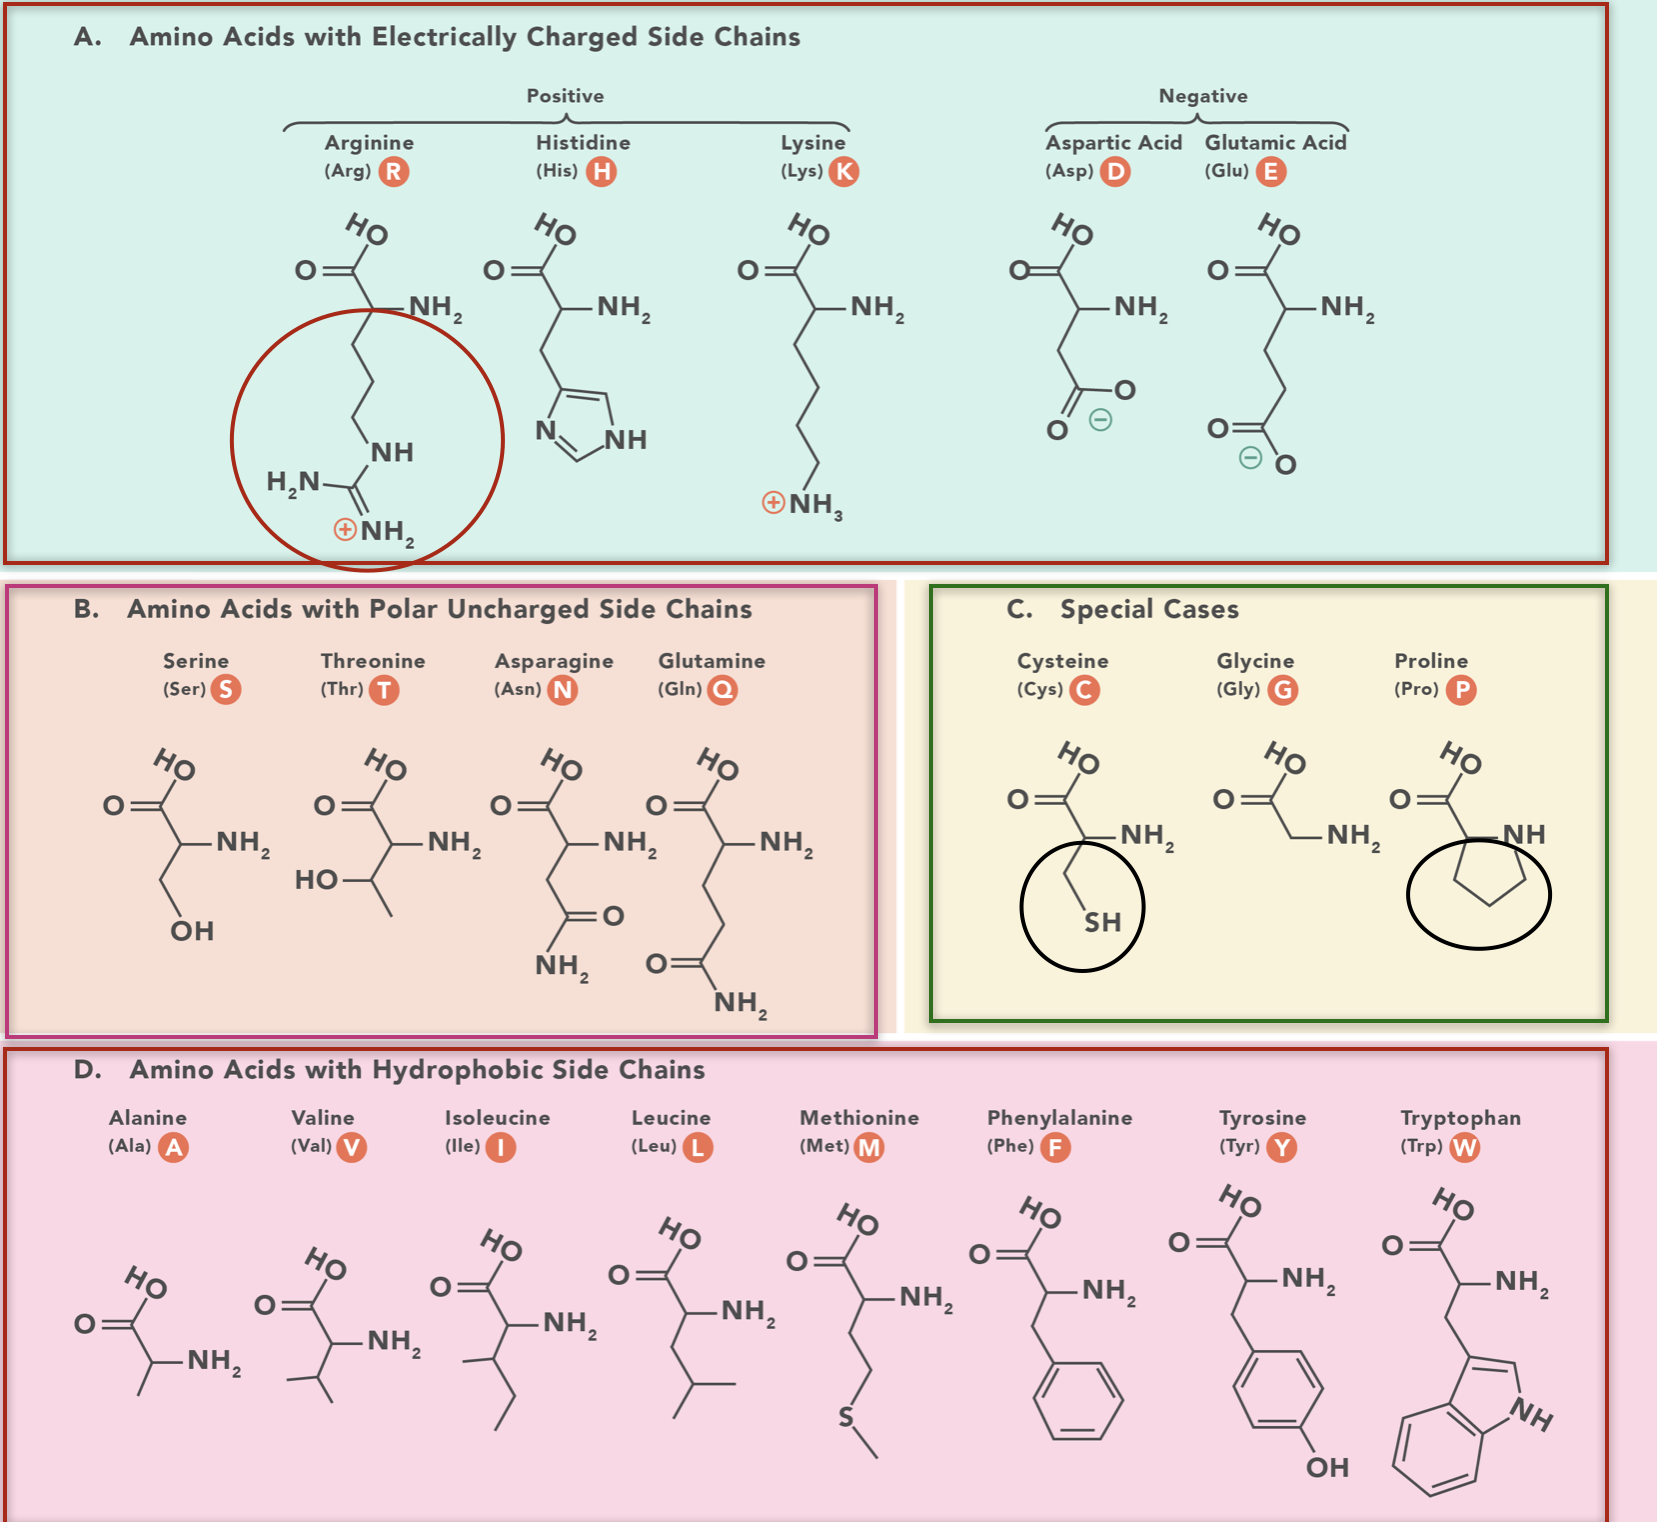 A group of images of different types of molecules

Description automatically generated with medium confidence